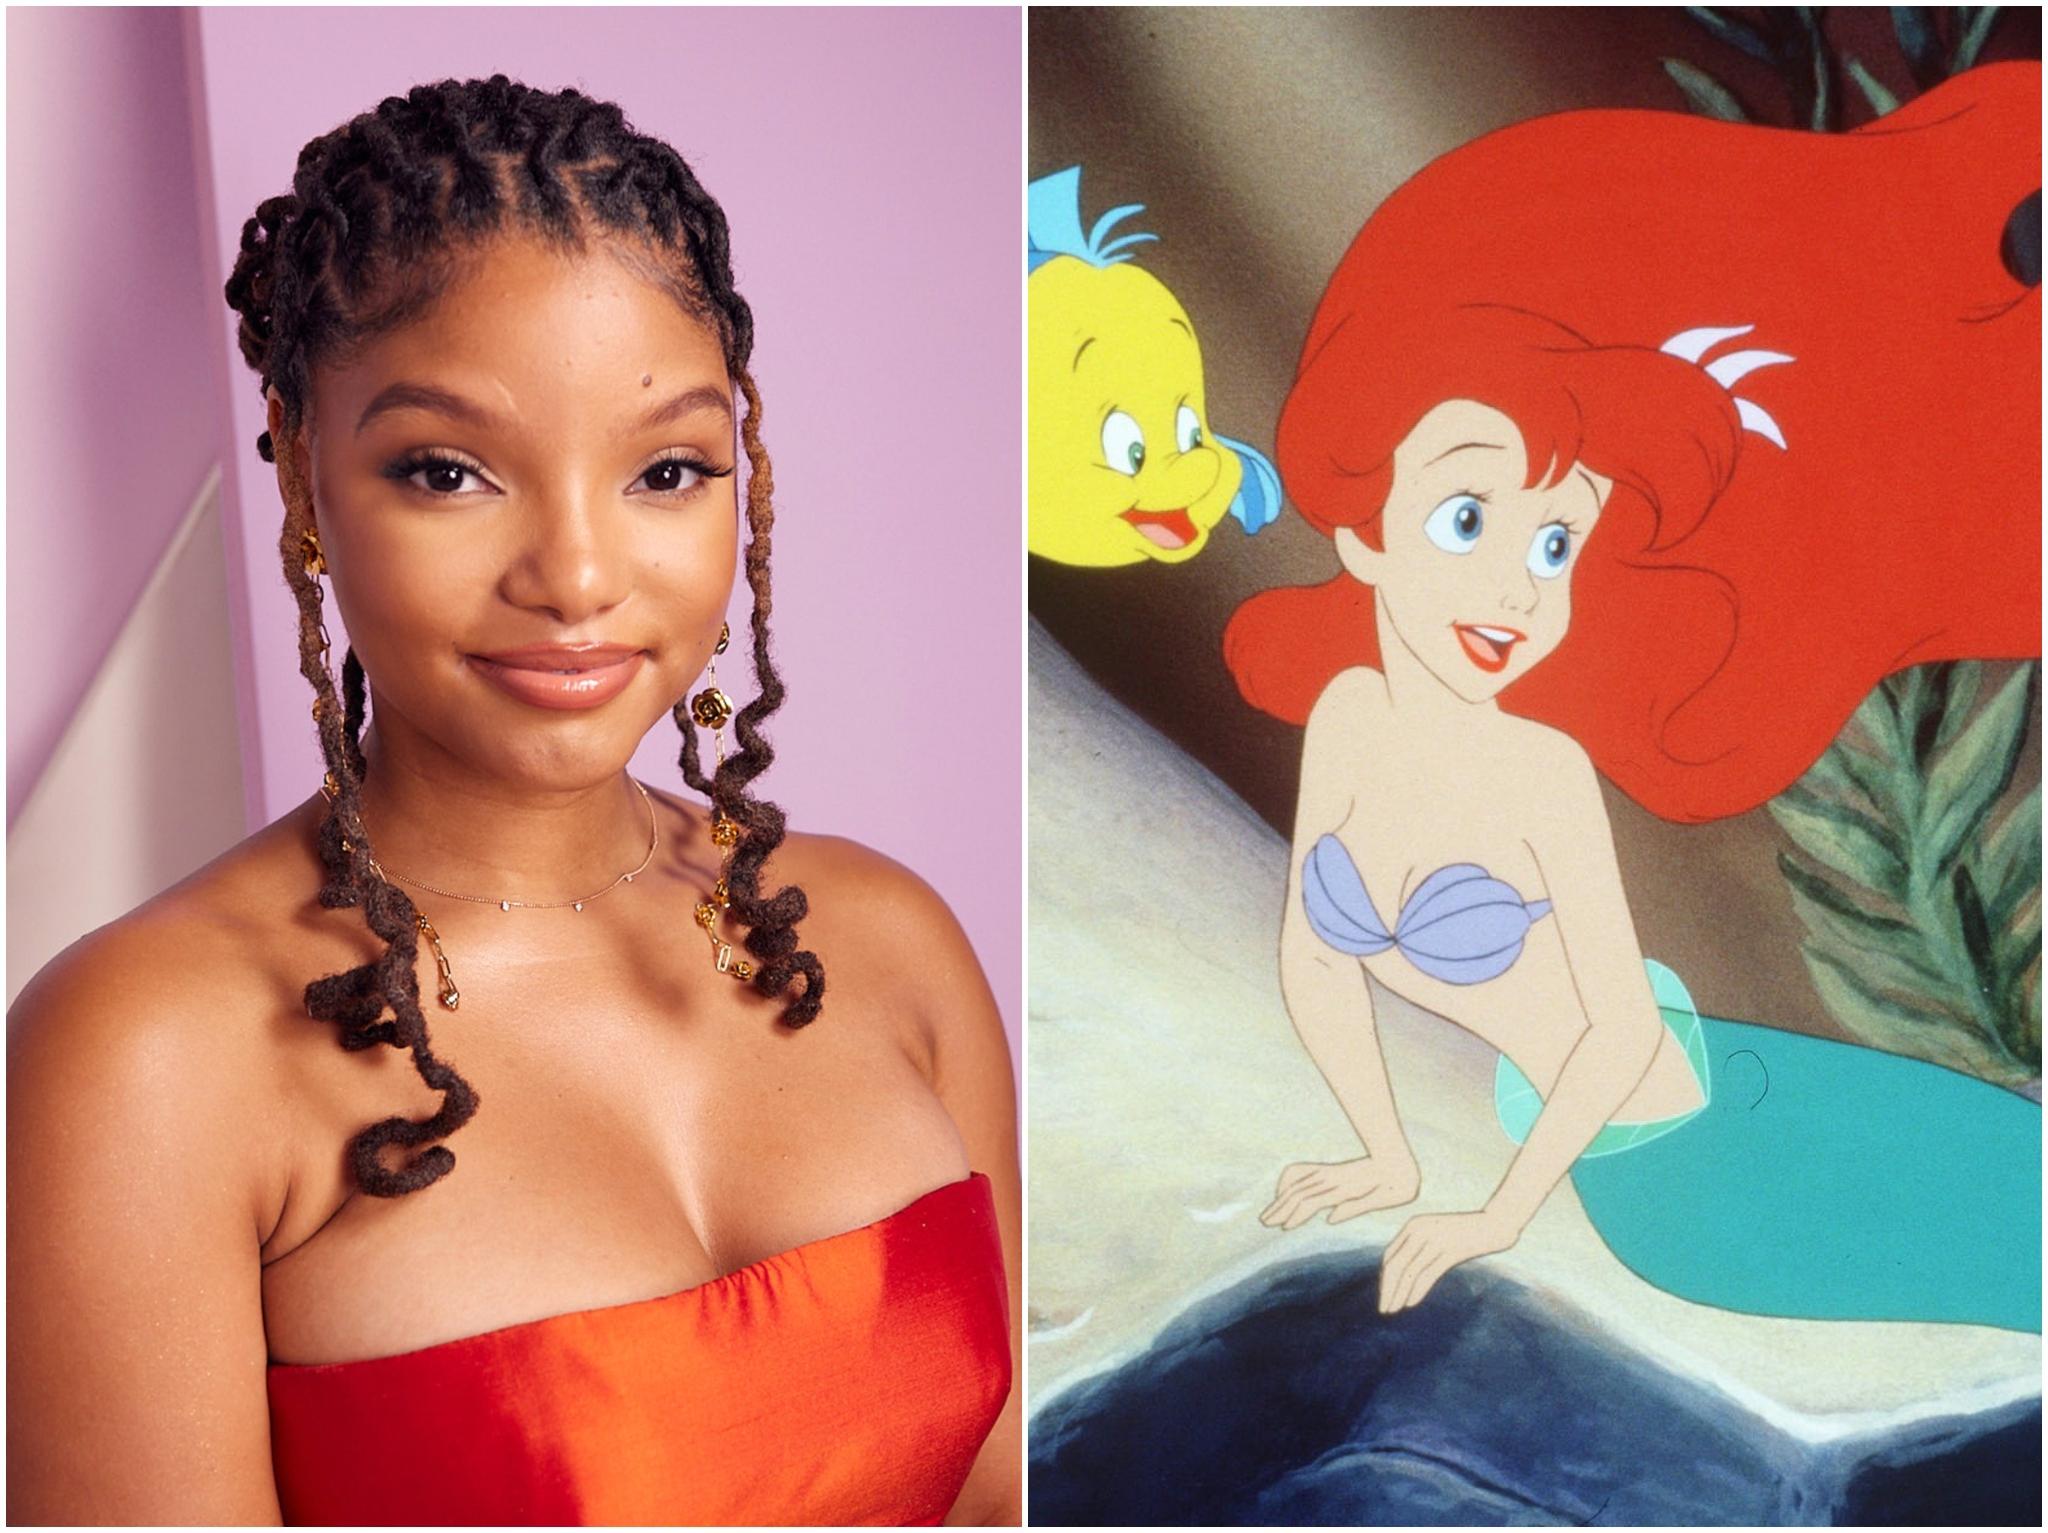 Why is a Black Ariel so controversial?